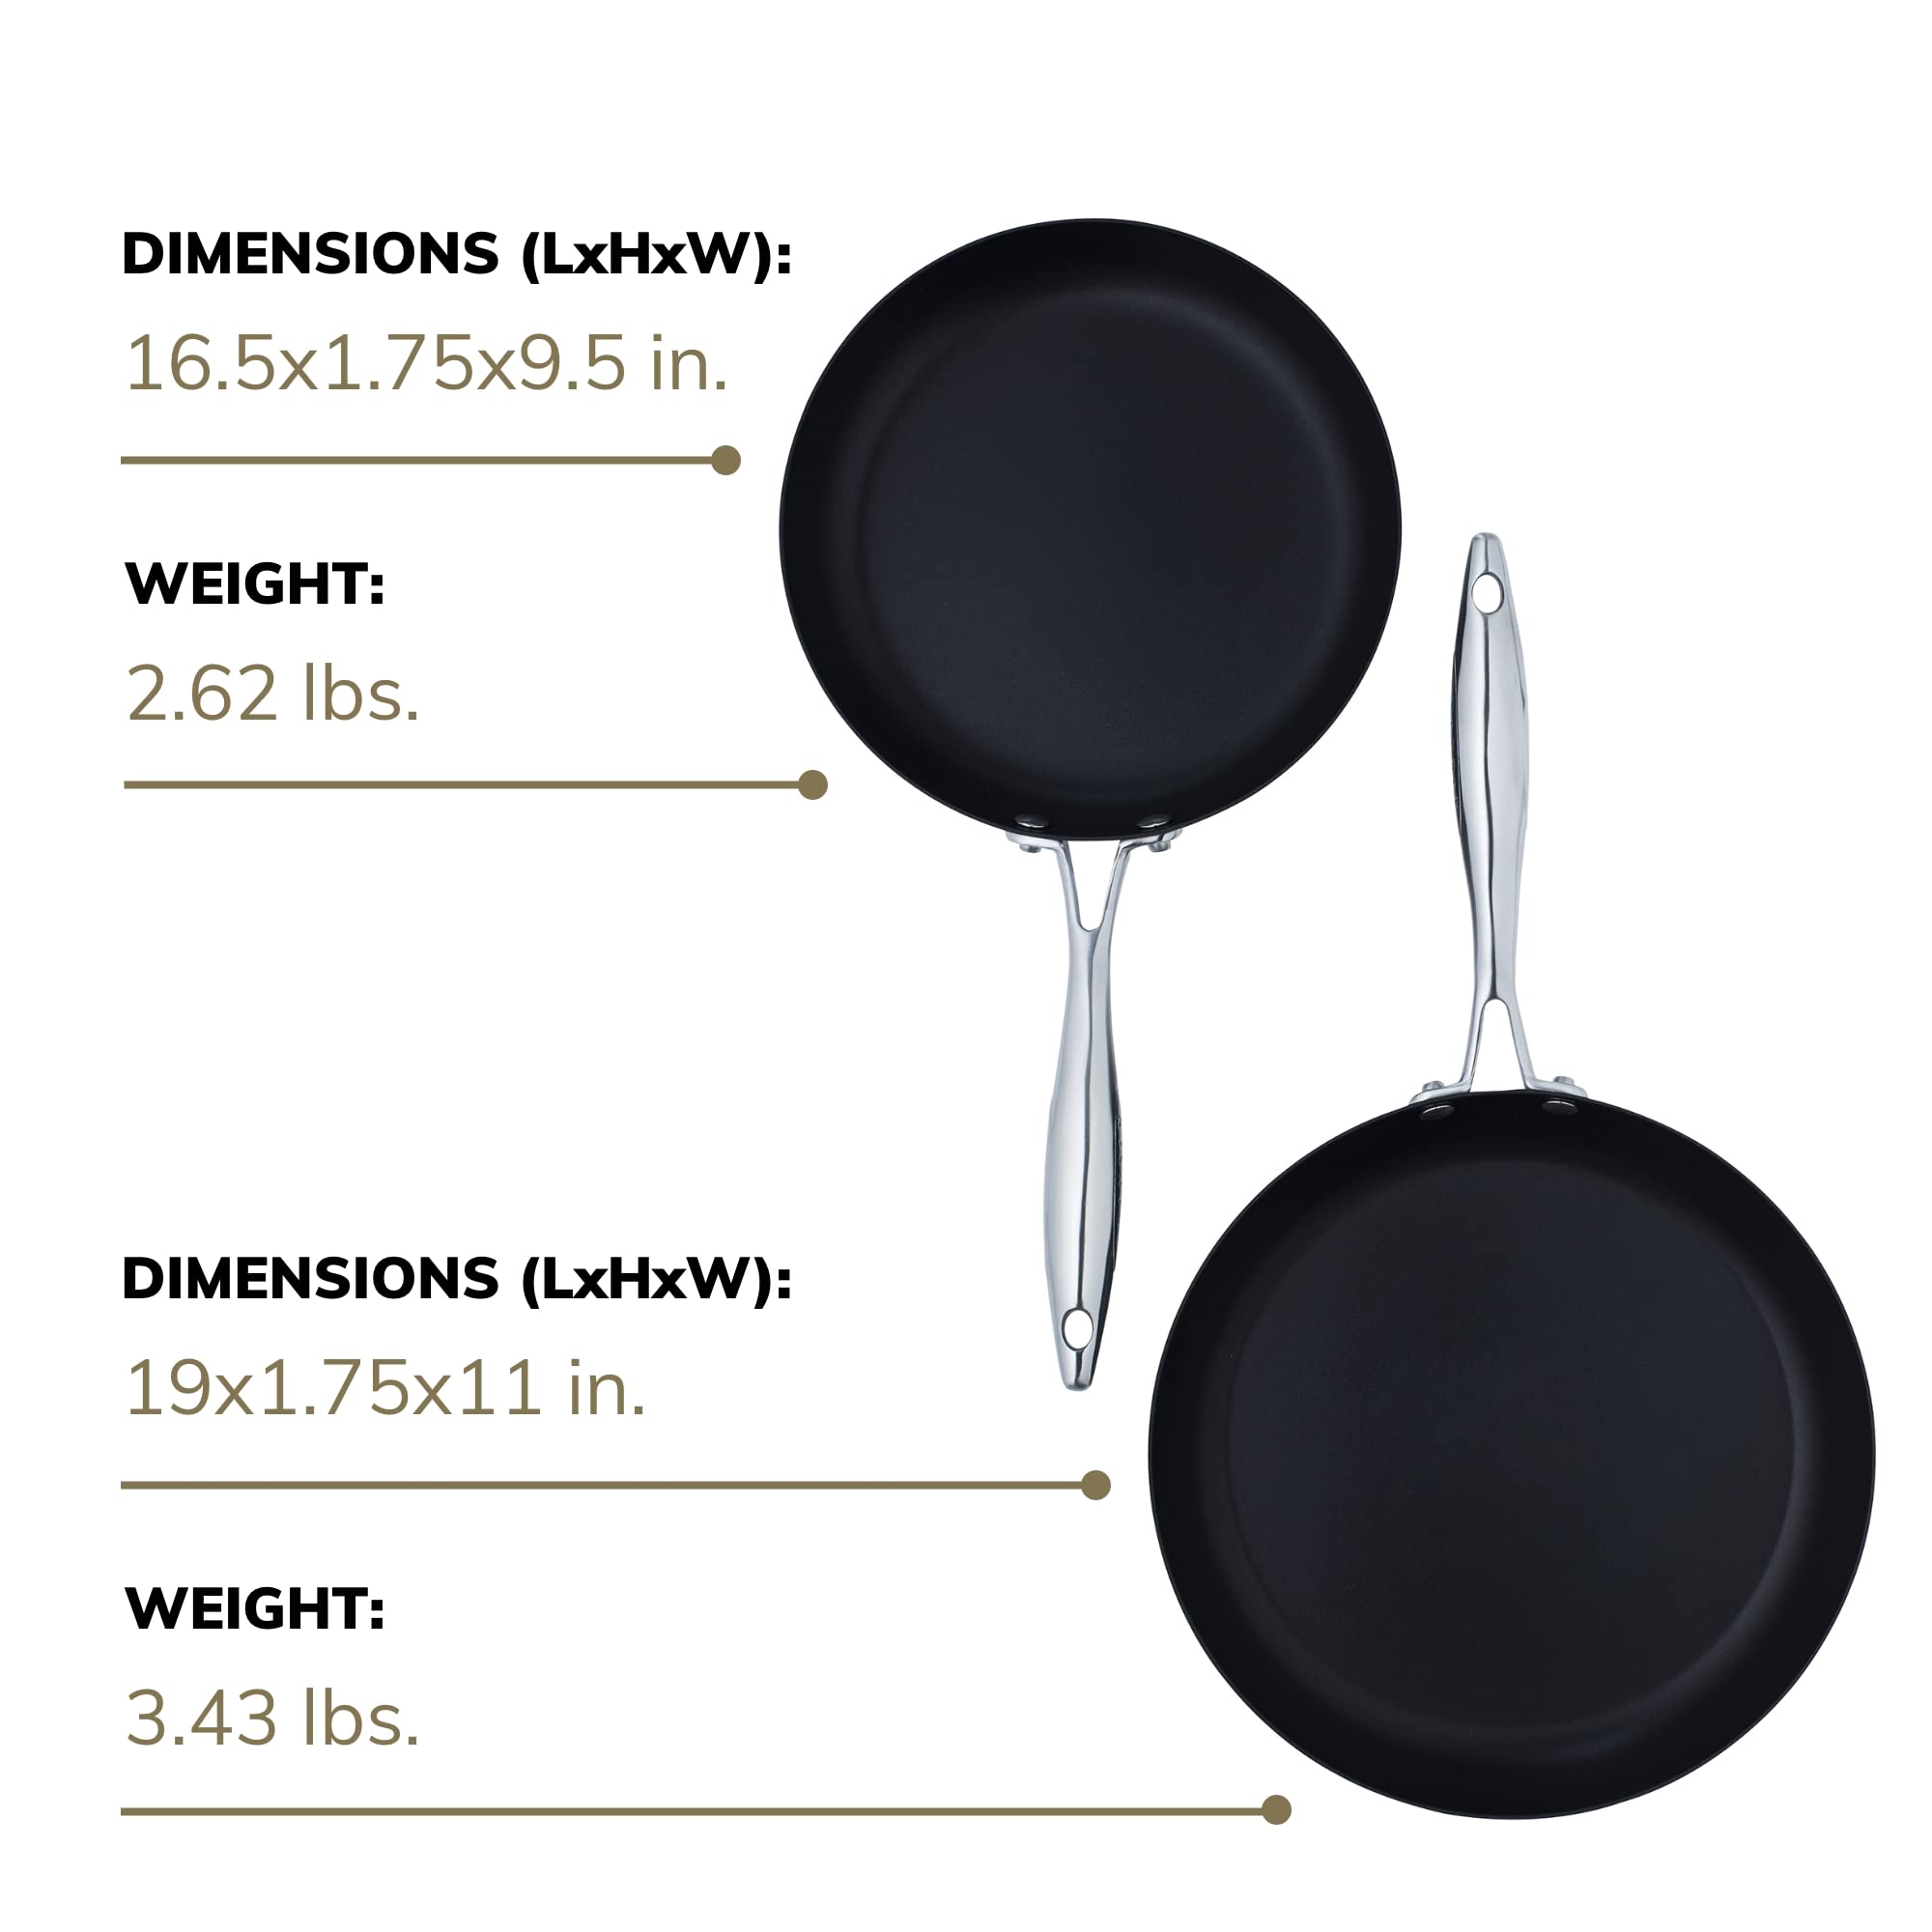 SCANPAN Professional Fry Pan Set - Includes 9.5” & 11” Fry Pans - Easy-to-Use Nonstick Cookware - Dishwasher, Metal Utensil & Oven Safe - Made in Denmark